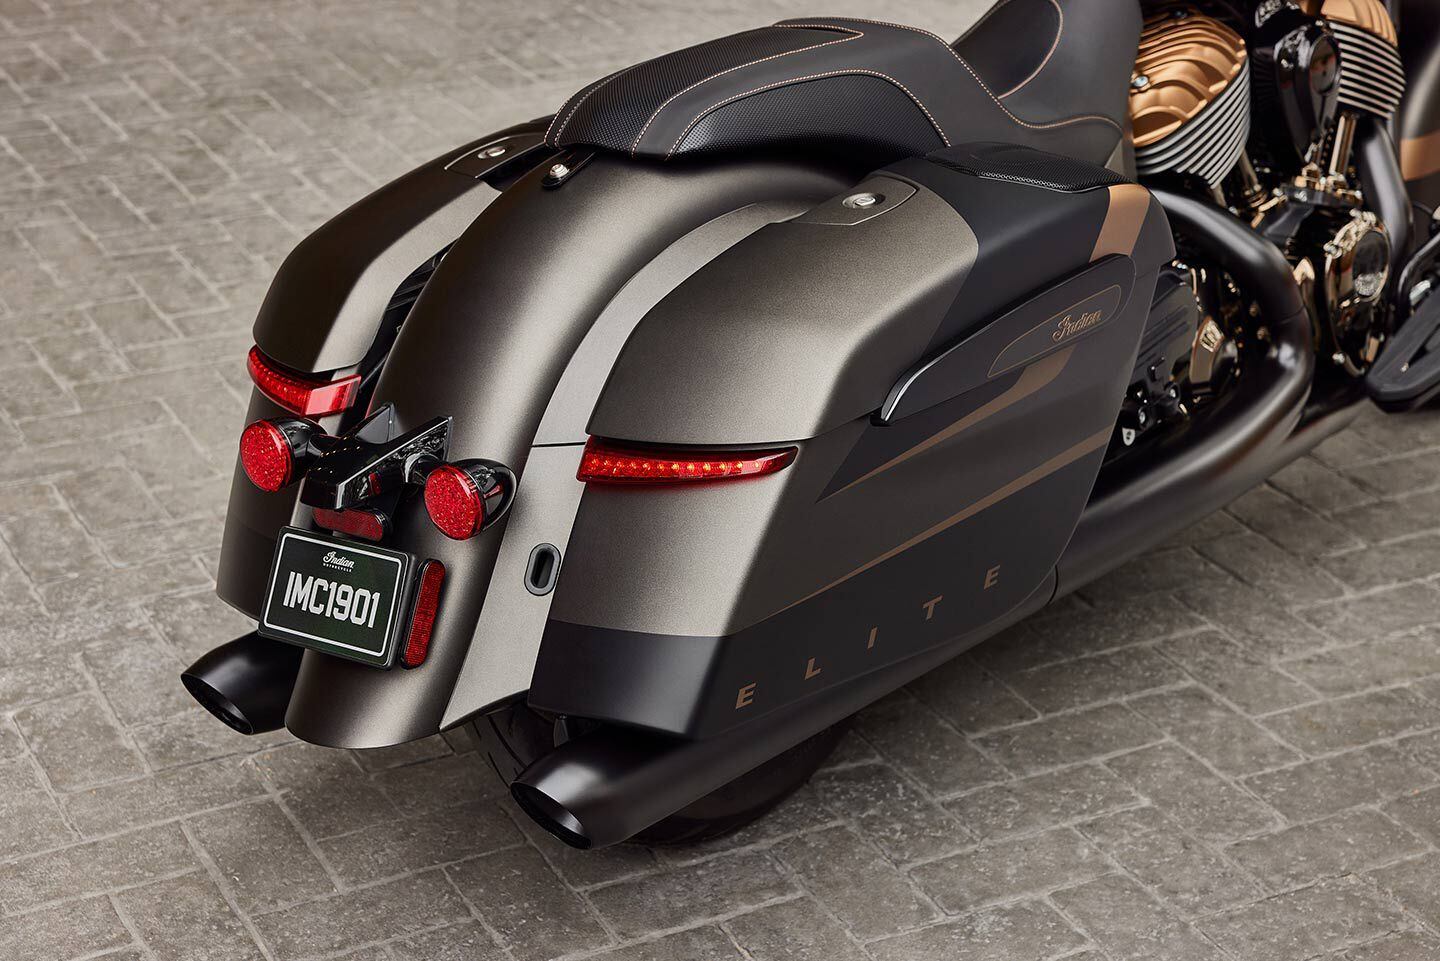 The weatherproof and remote-locking saddlebags give you more than 18 gallons of storage; rear saddlebag LED
lights make for a cool look at night.